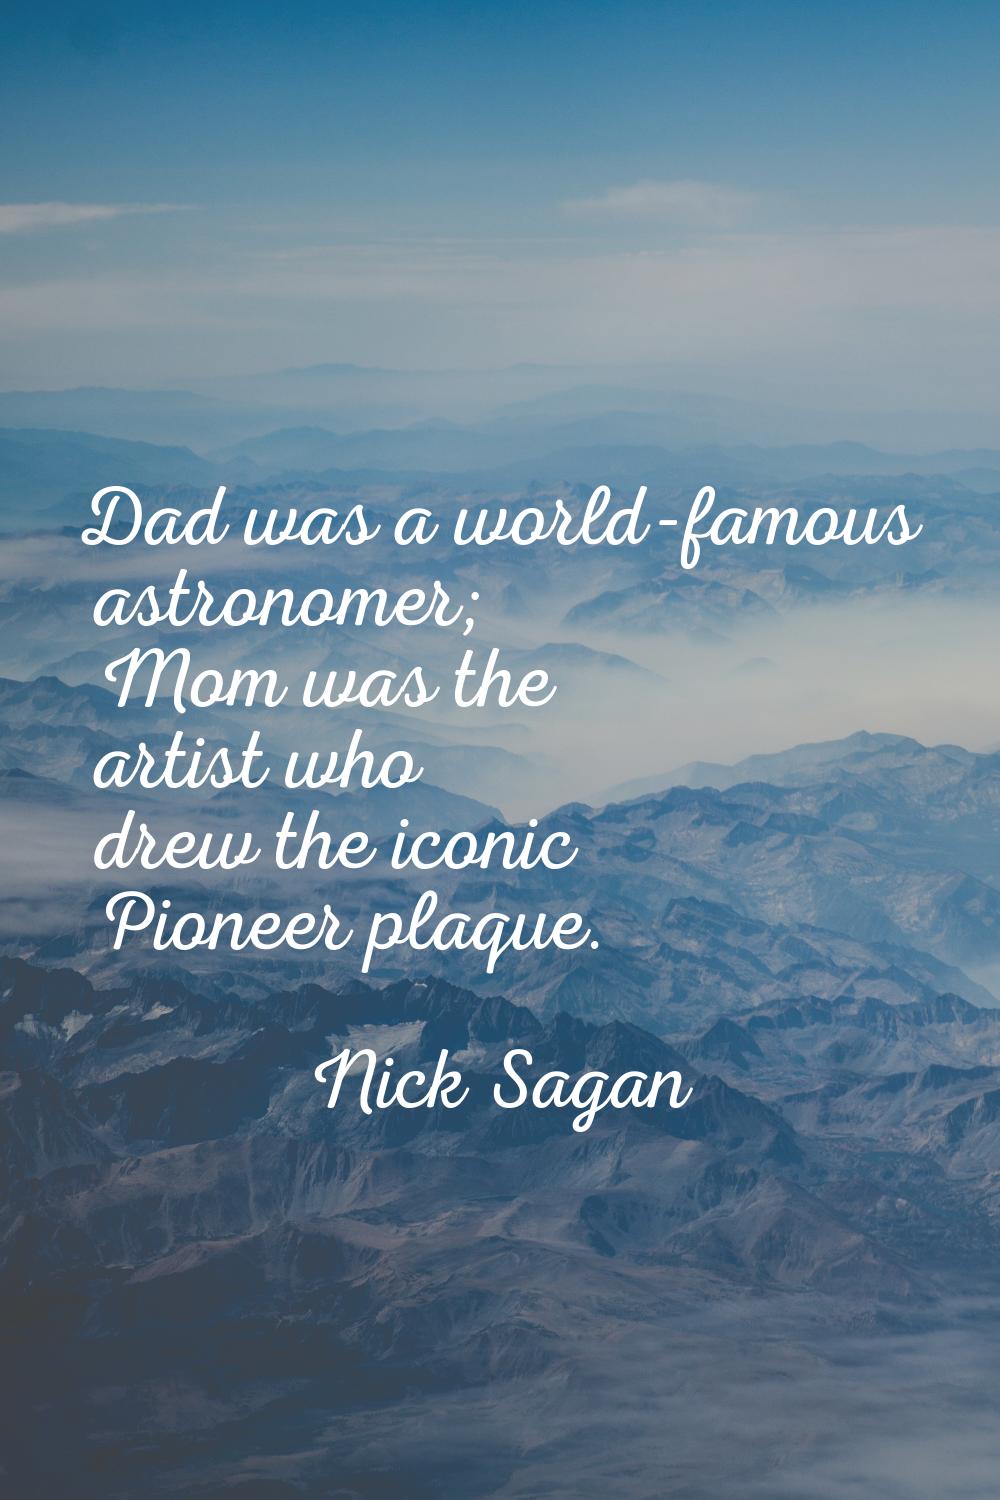 Dad was a world-famous astronomer; Mom was the artist who drew the iconic Pioneer plaque.